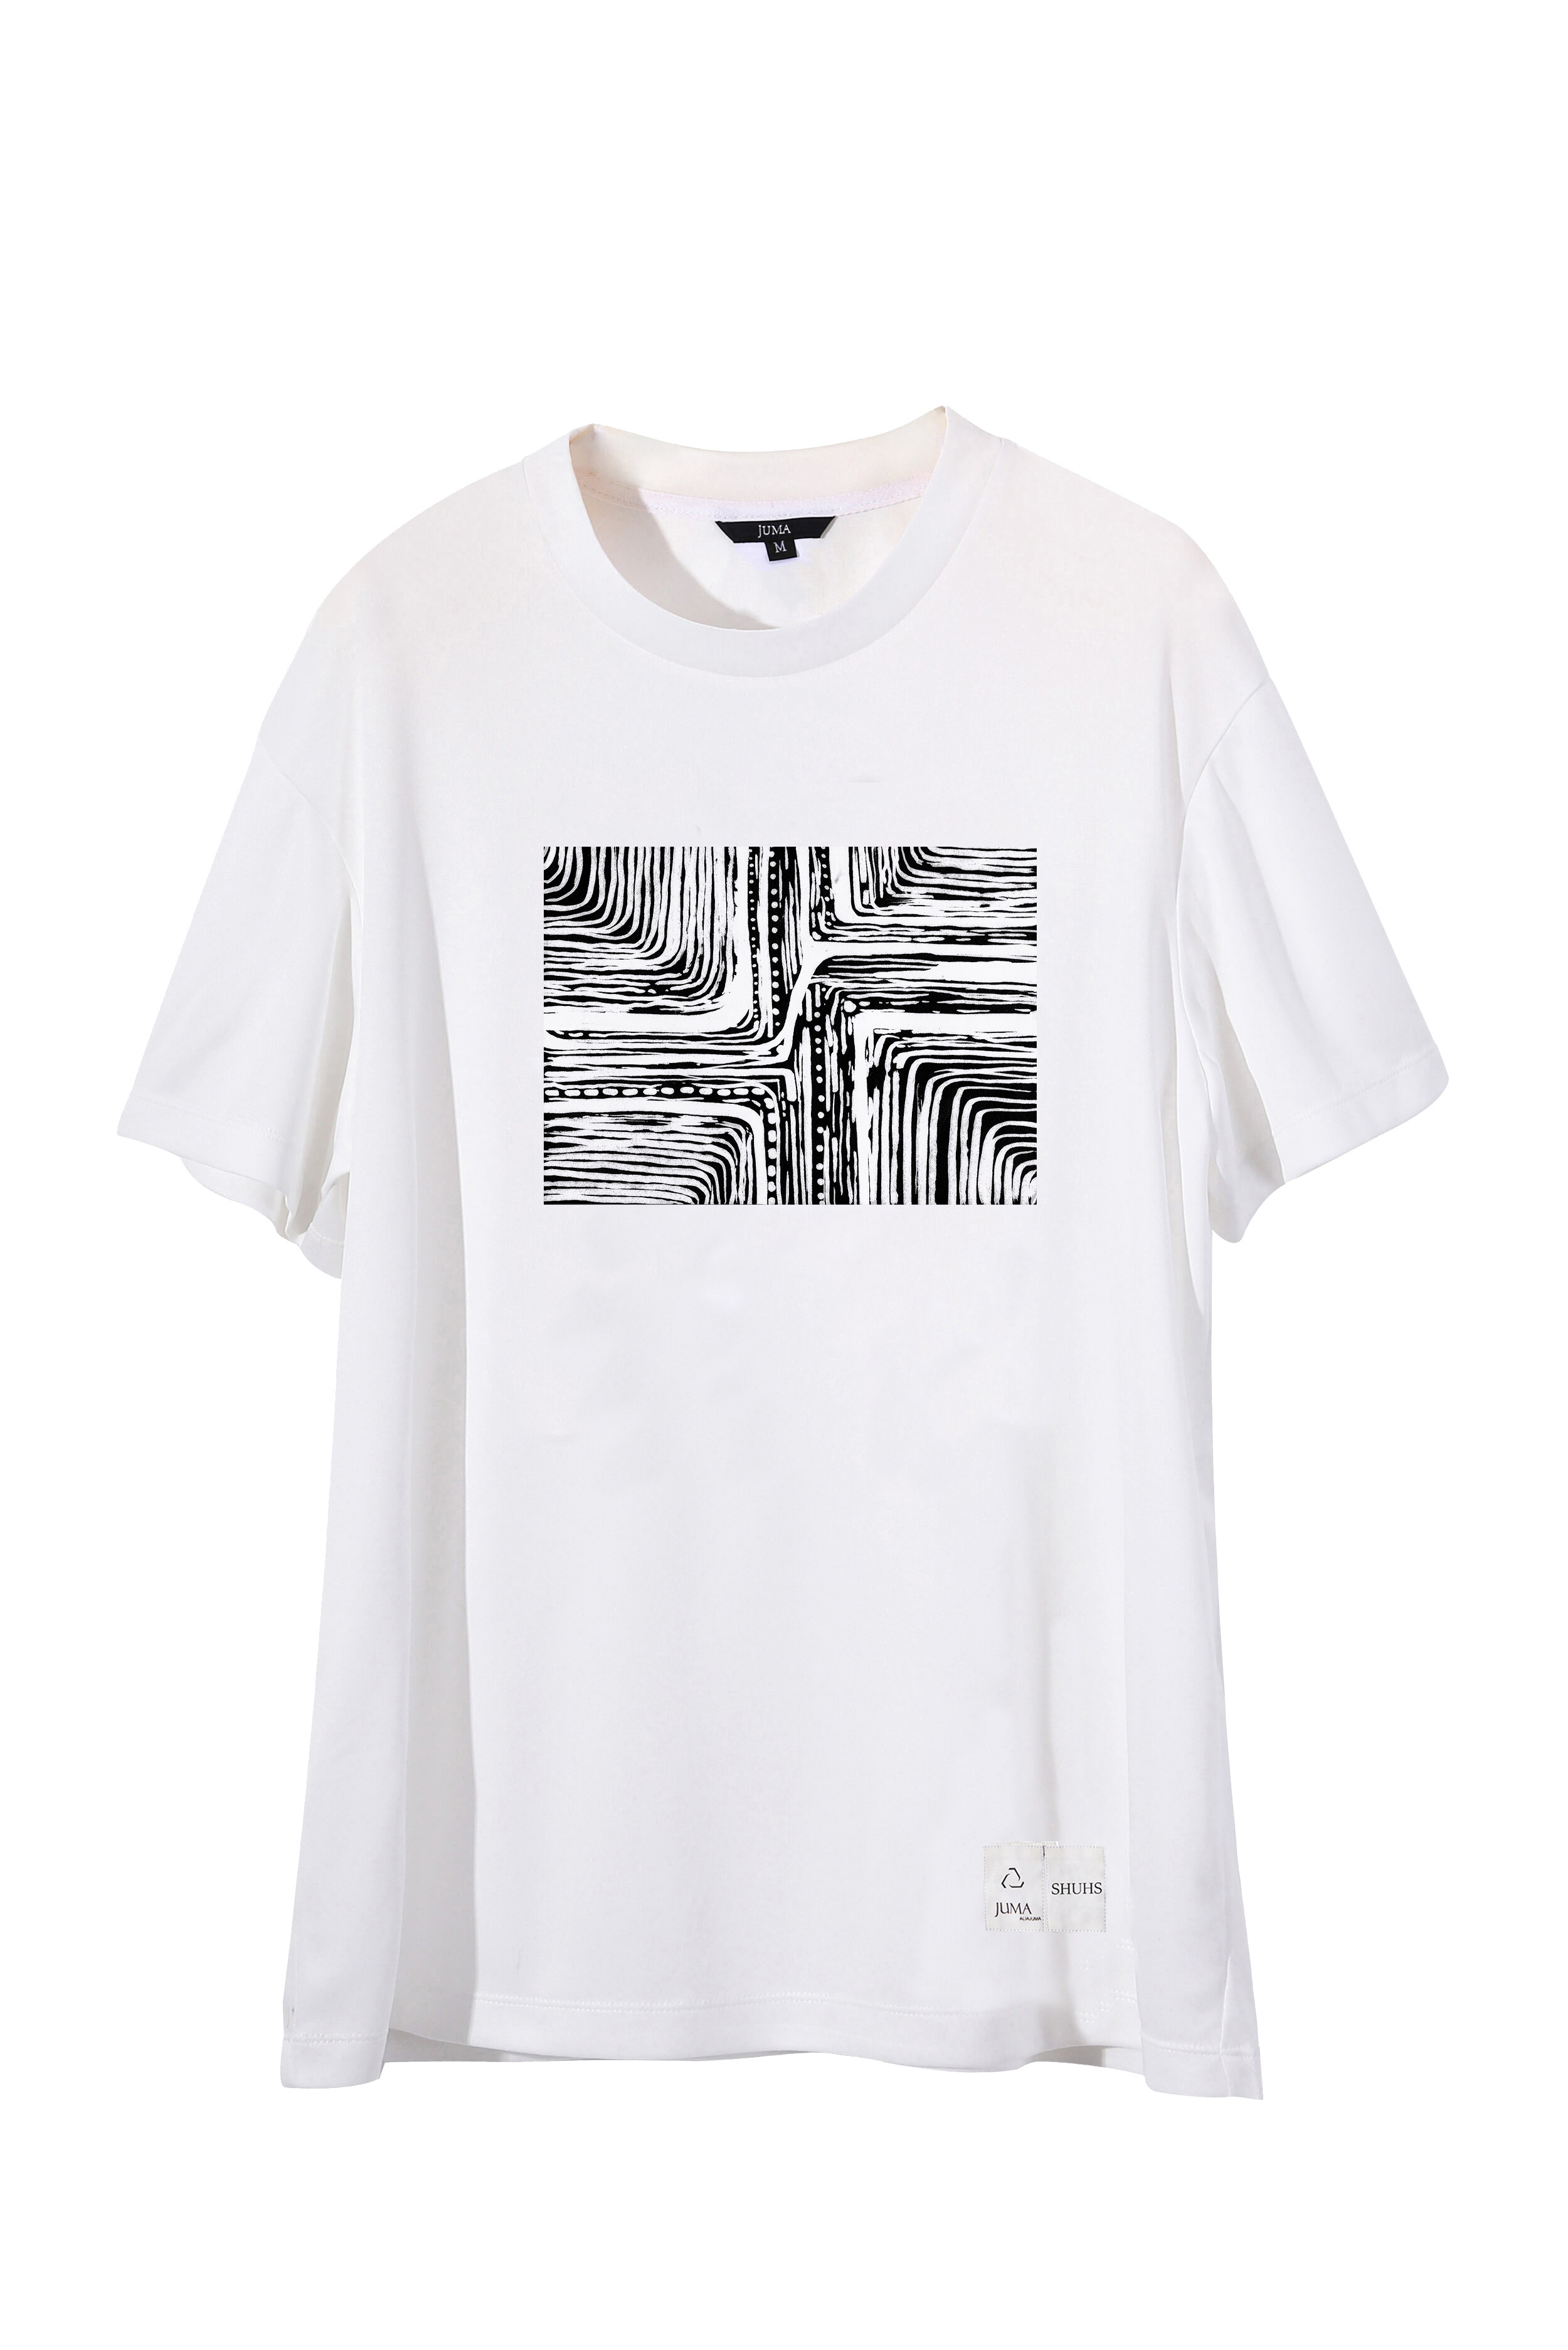 Heal We Are UFO 印花 T 恤 - 4 个再生水瓶 - 白色｜Heal We Are UFO Print T-Shirt - 4 Recycled Water Bottles - White